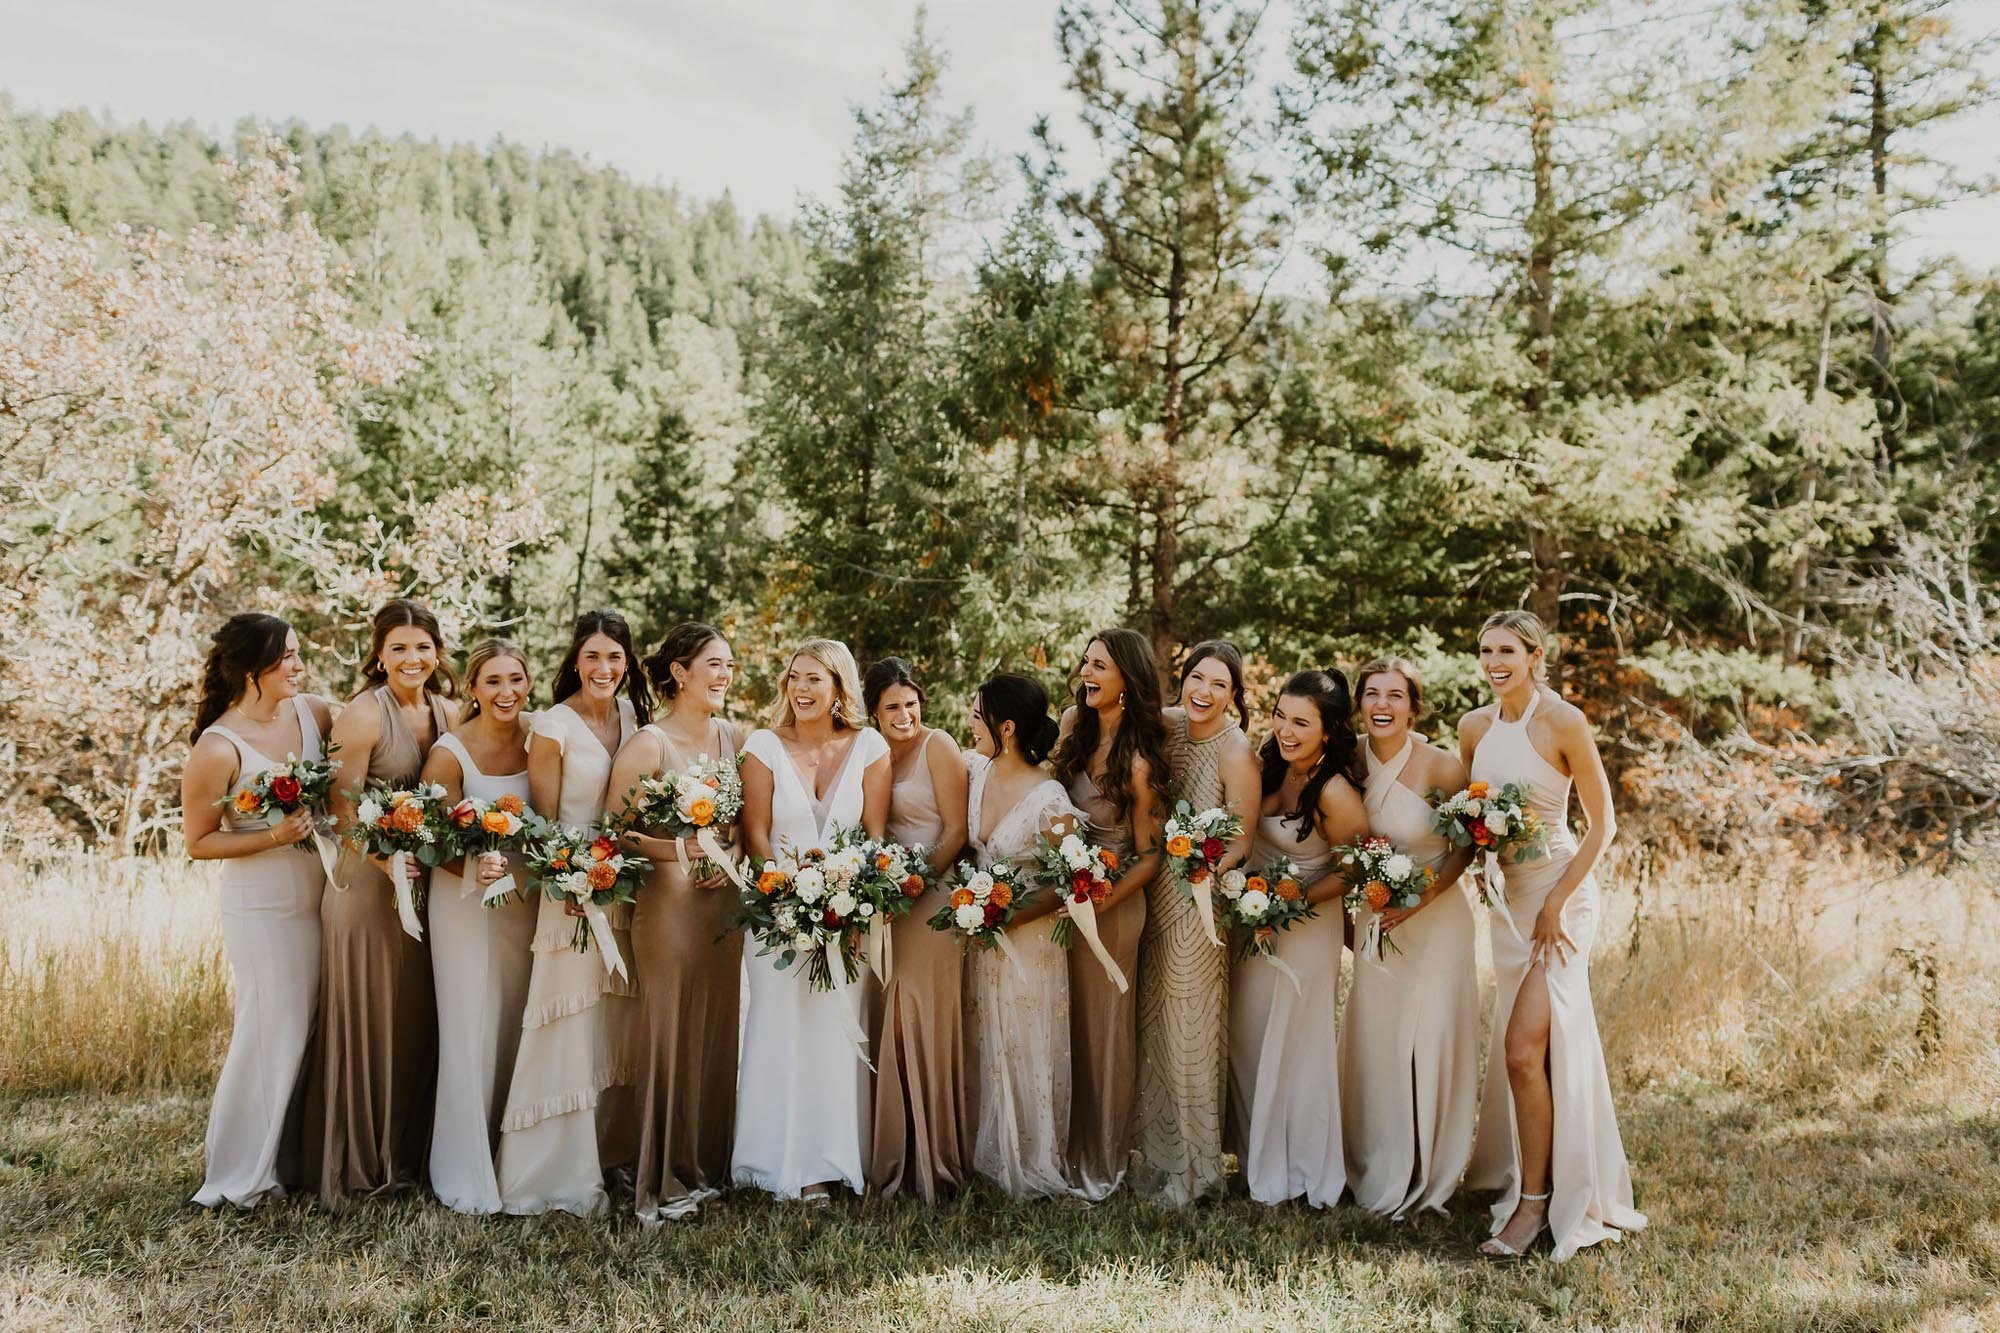  a wedding party all laughing and smiling for a bride’s big day. the bridesmaids are wearing various champagne colored dresses and have bouquets with orange, white, and rust colored flowers. they are standing on a mountain in colorado with trees in t